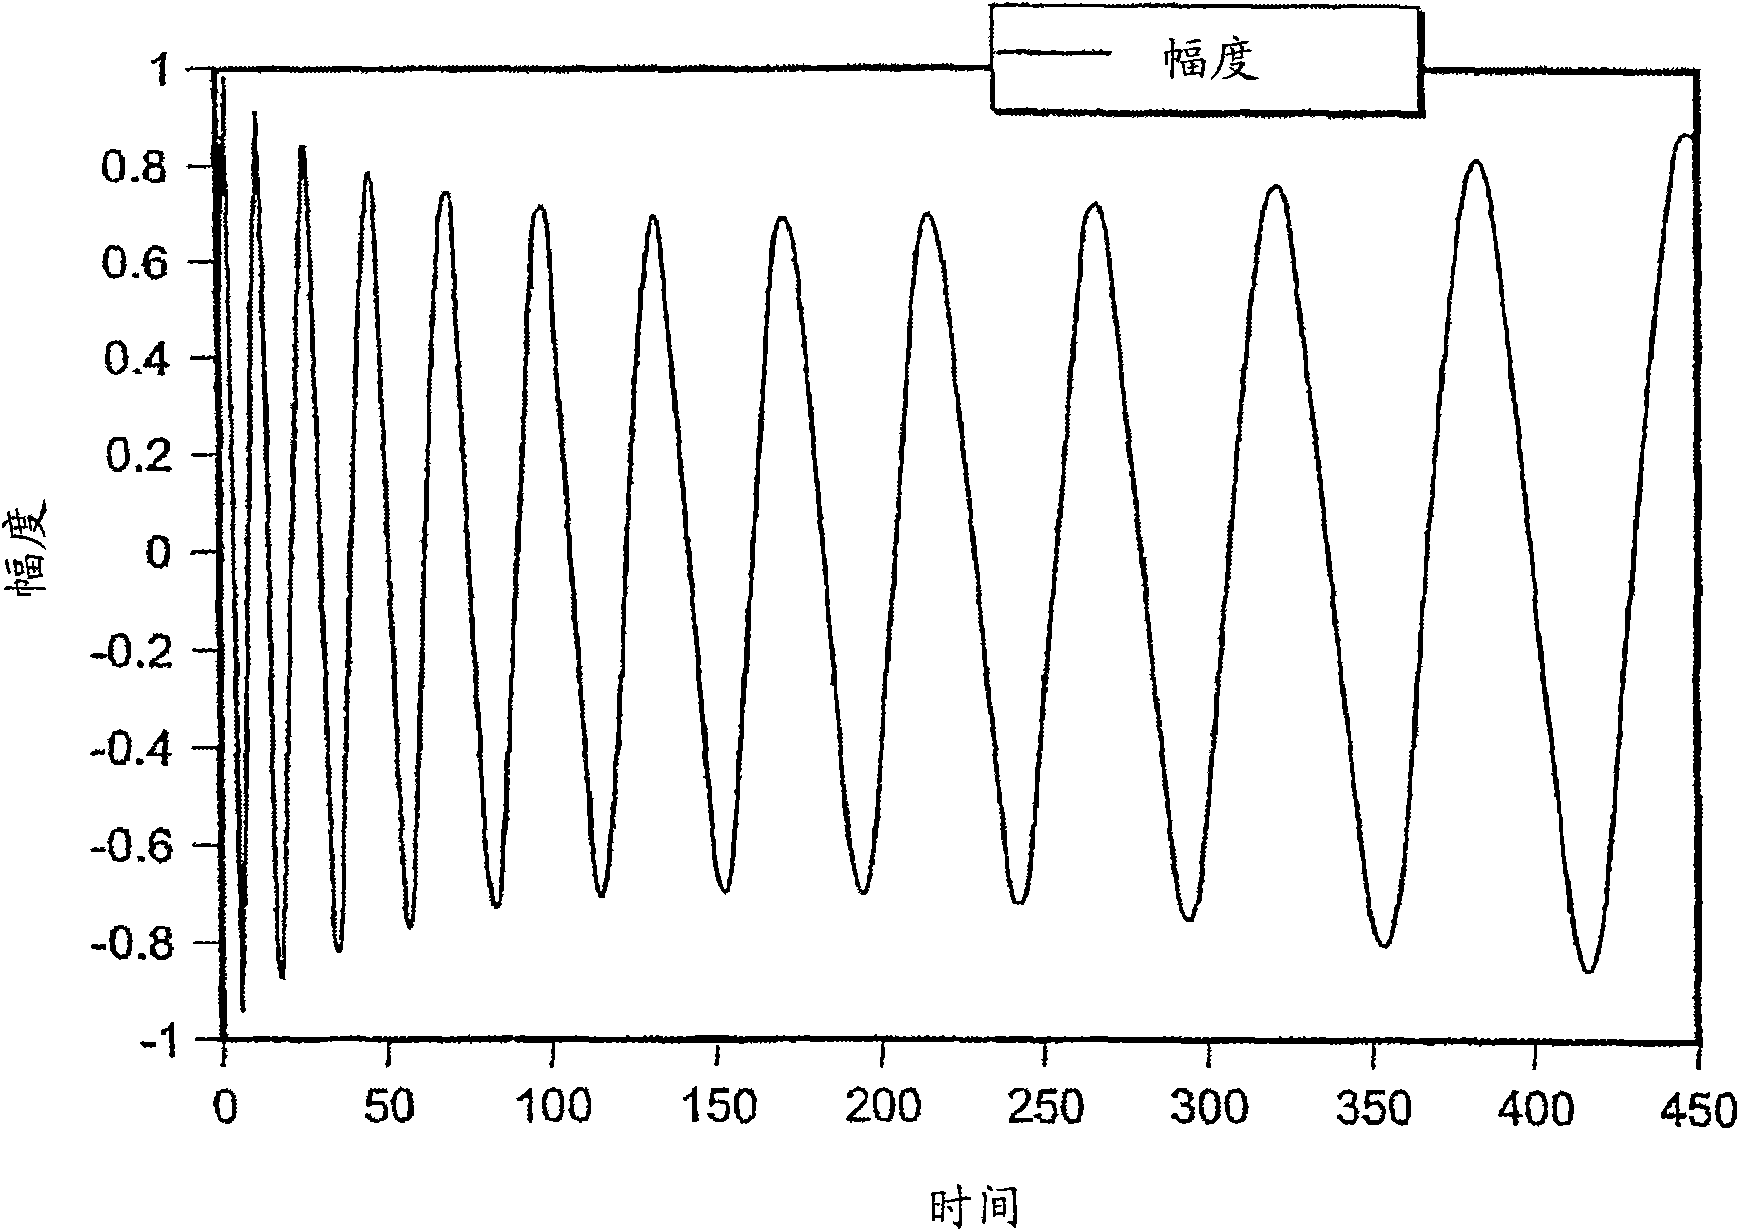 Matching a resonant frequency of a resonant cavity to a frequency of an input voltage